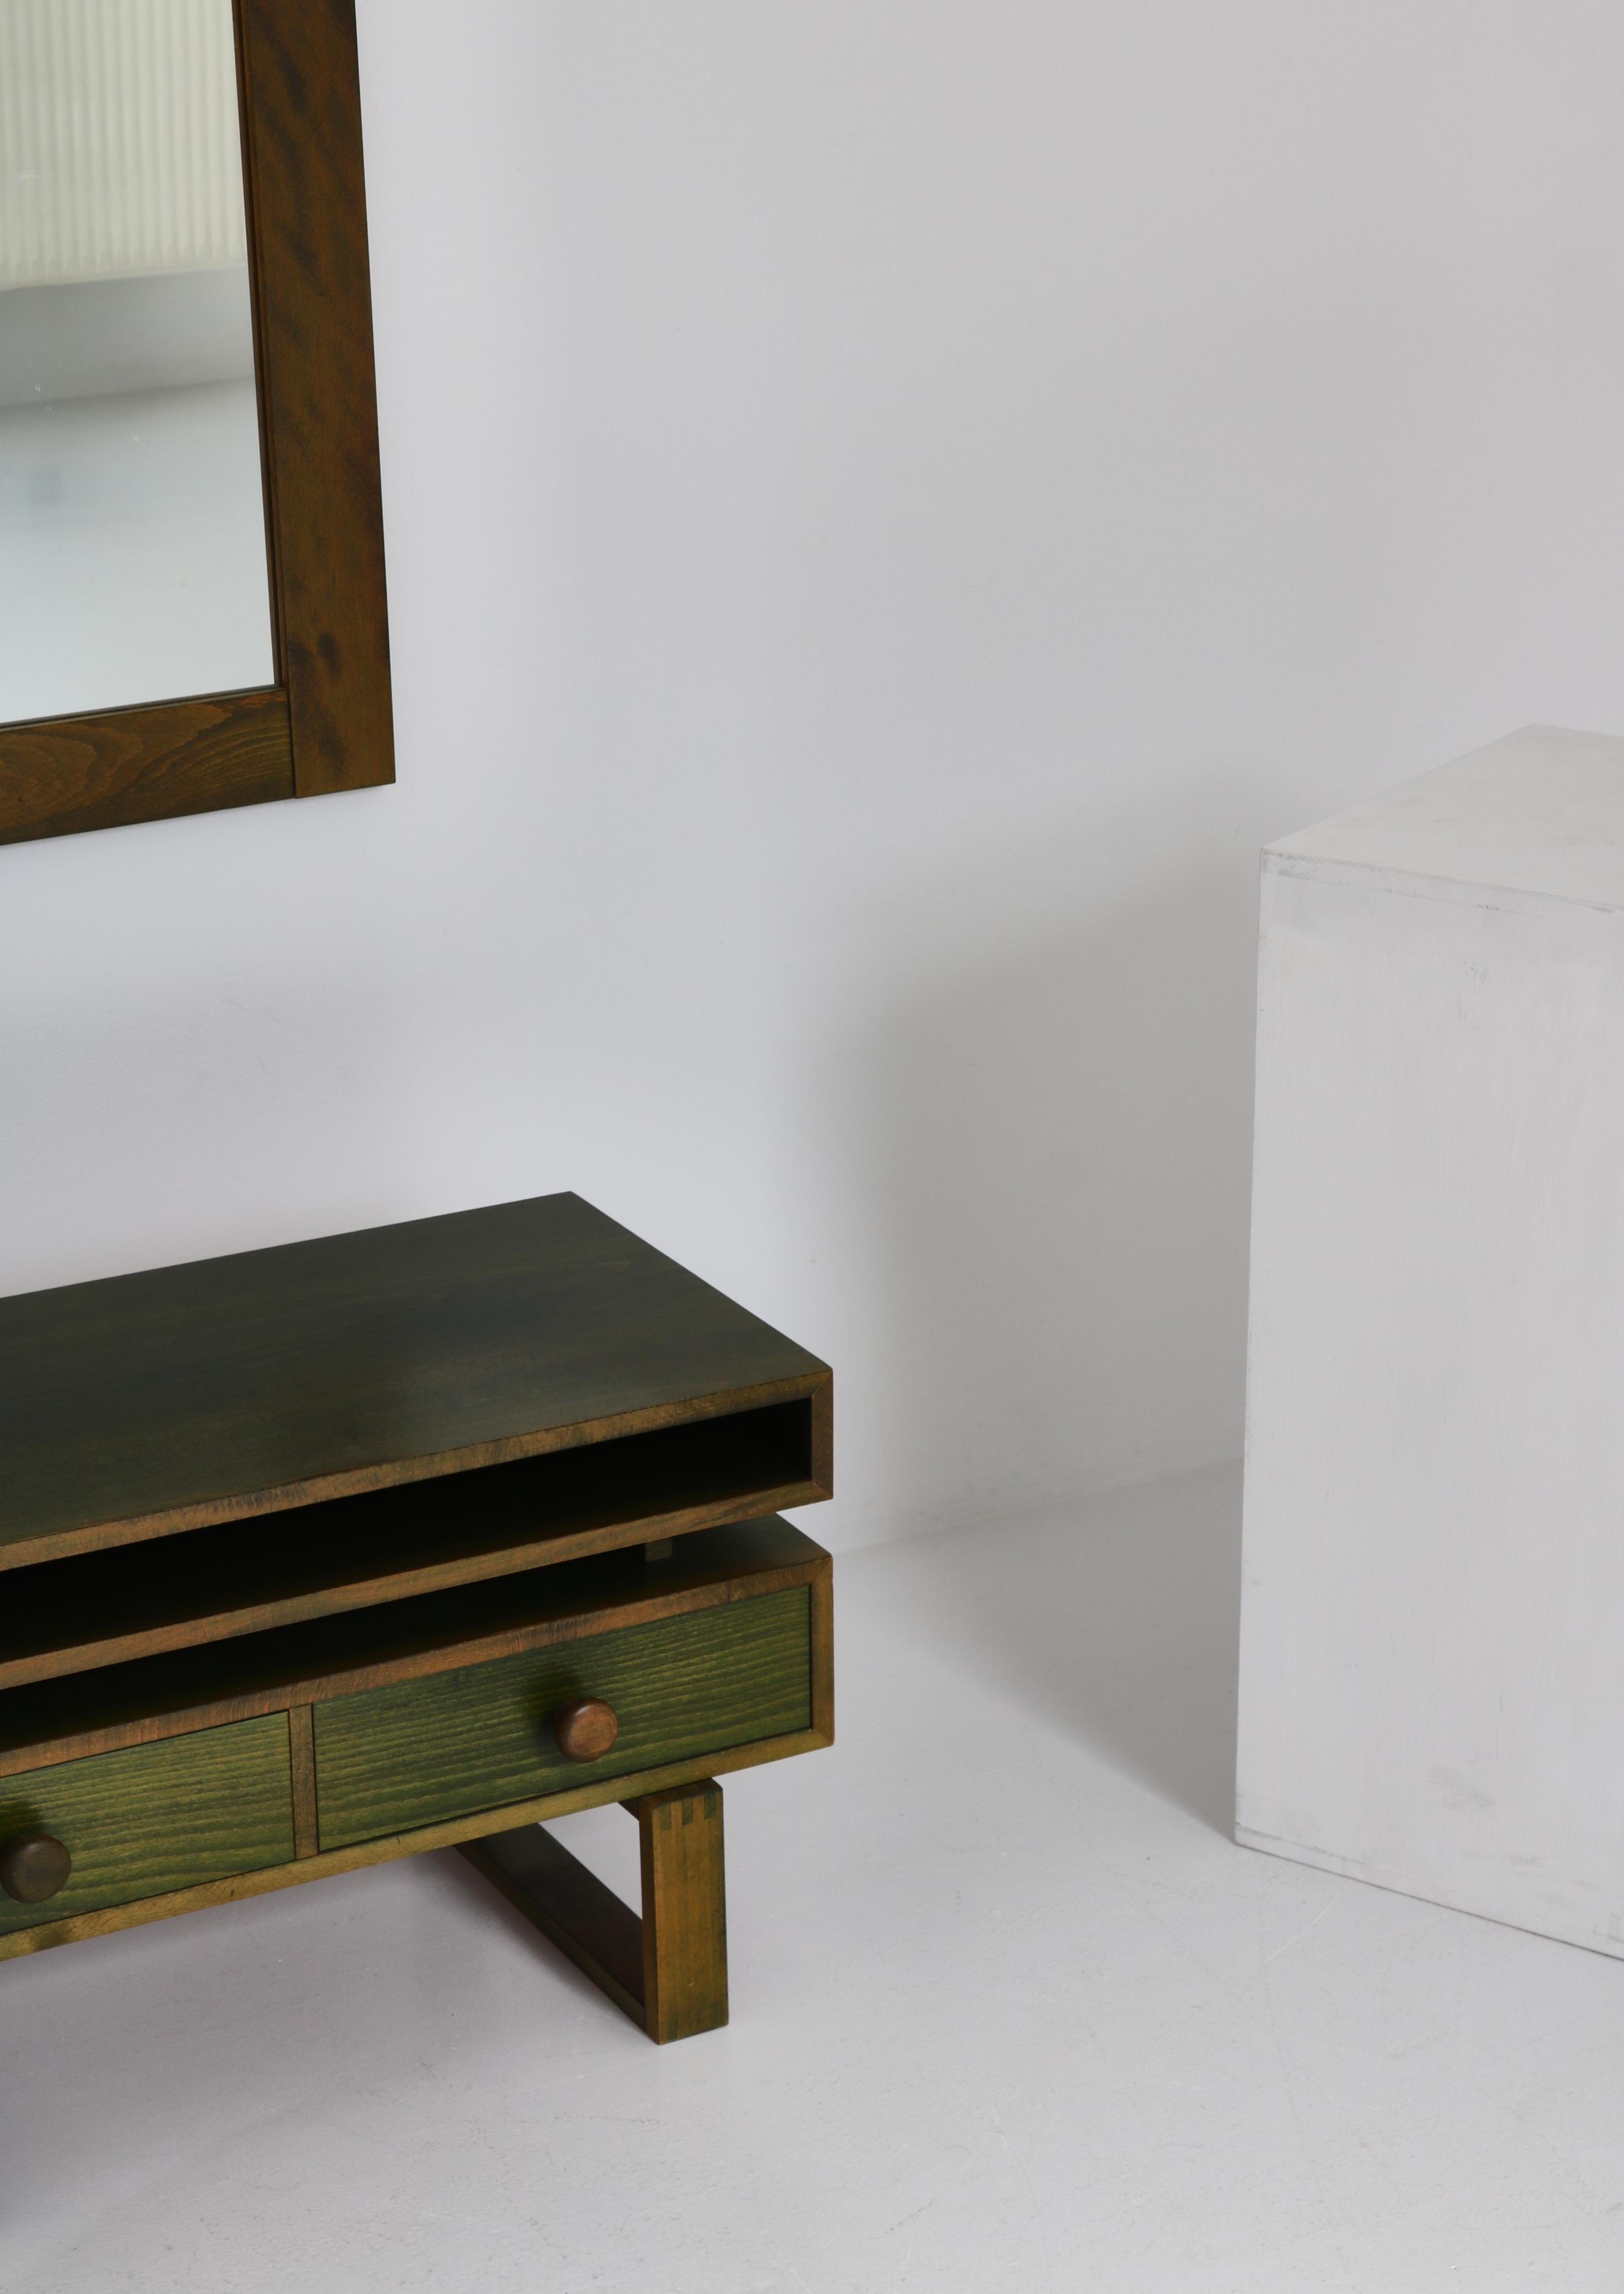 Swedish Scandinavian Modern Chest & Mirror in Green Stained Pinewood, Denmark, 1970s For Sale